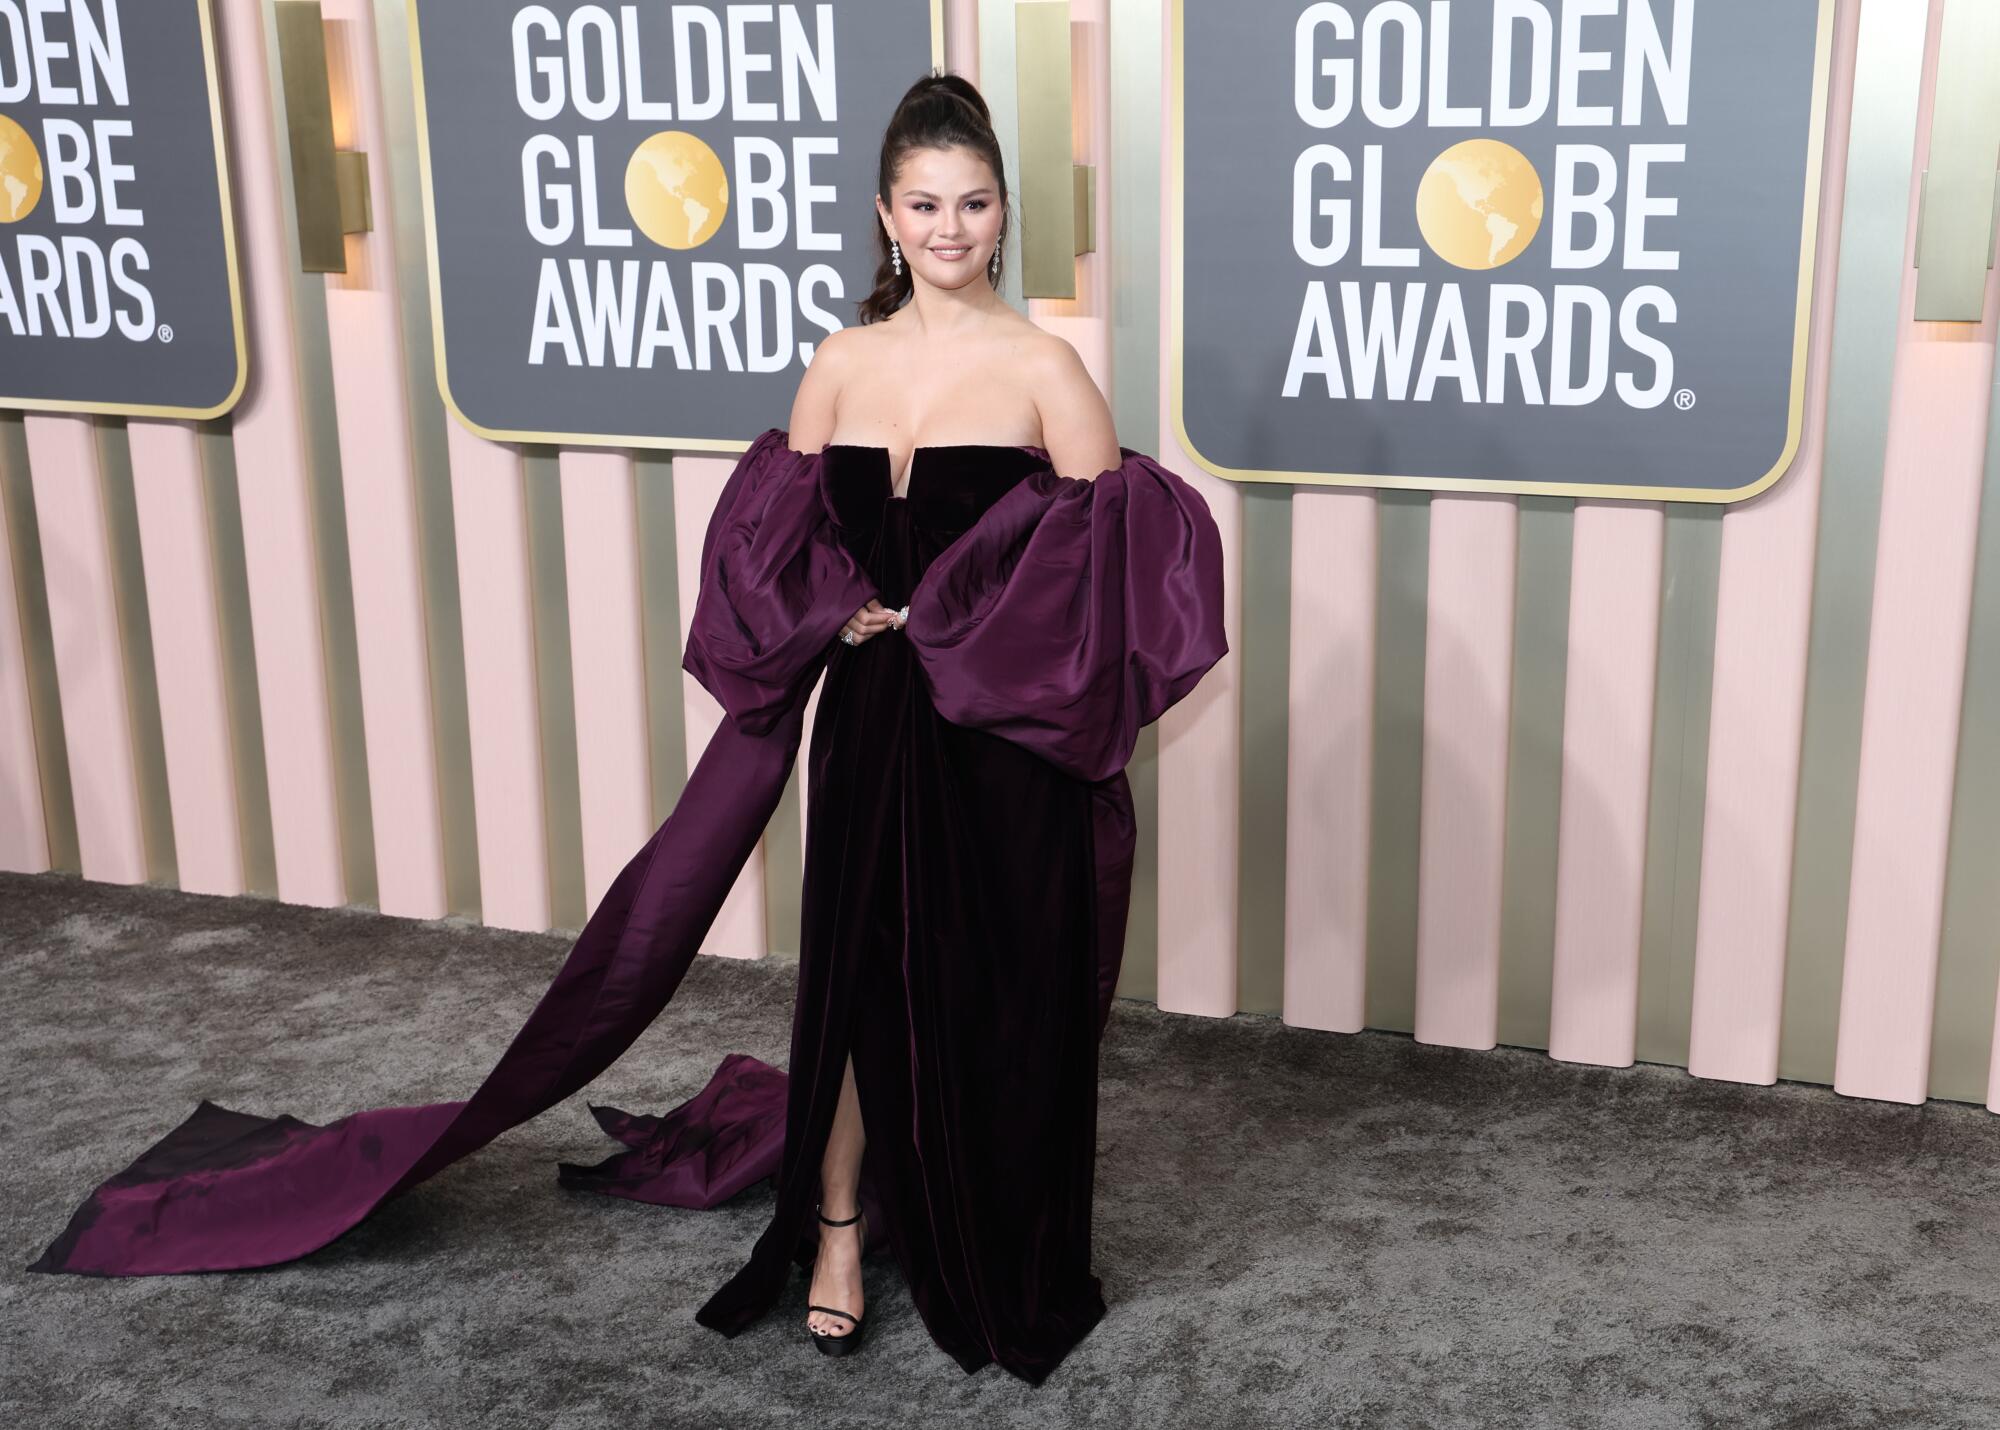 Selena Gomez murders the Golden Globes red carpet in this ensemble.